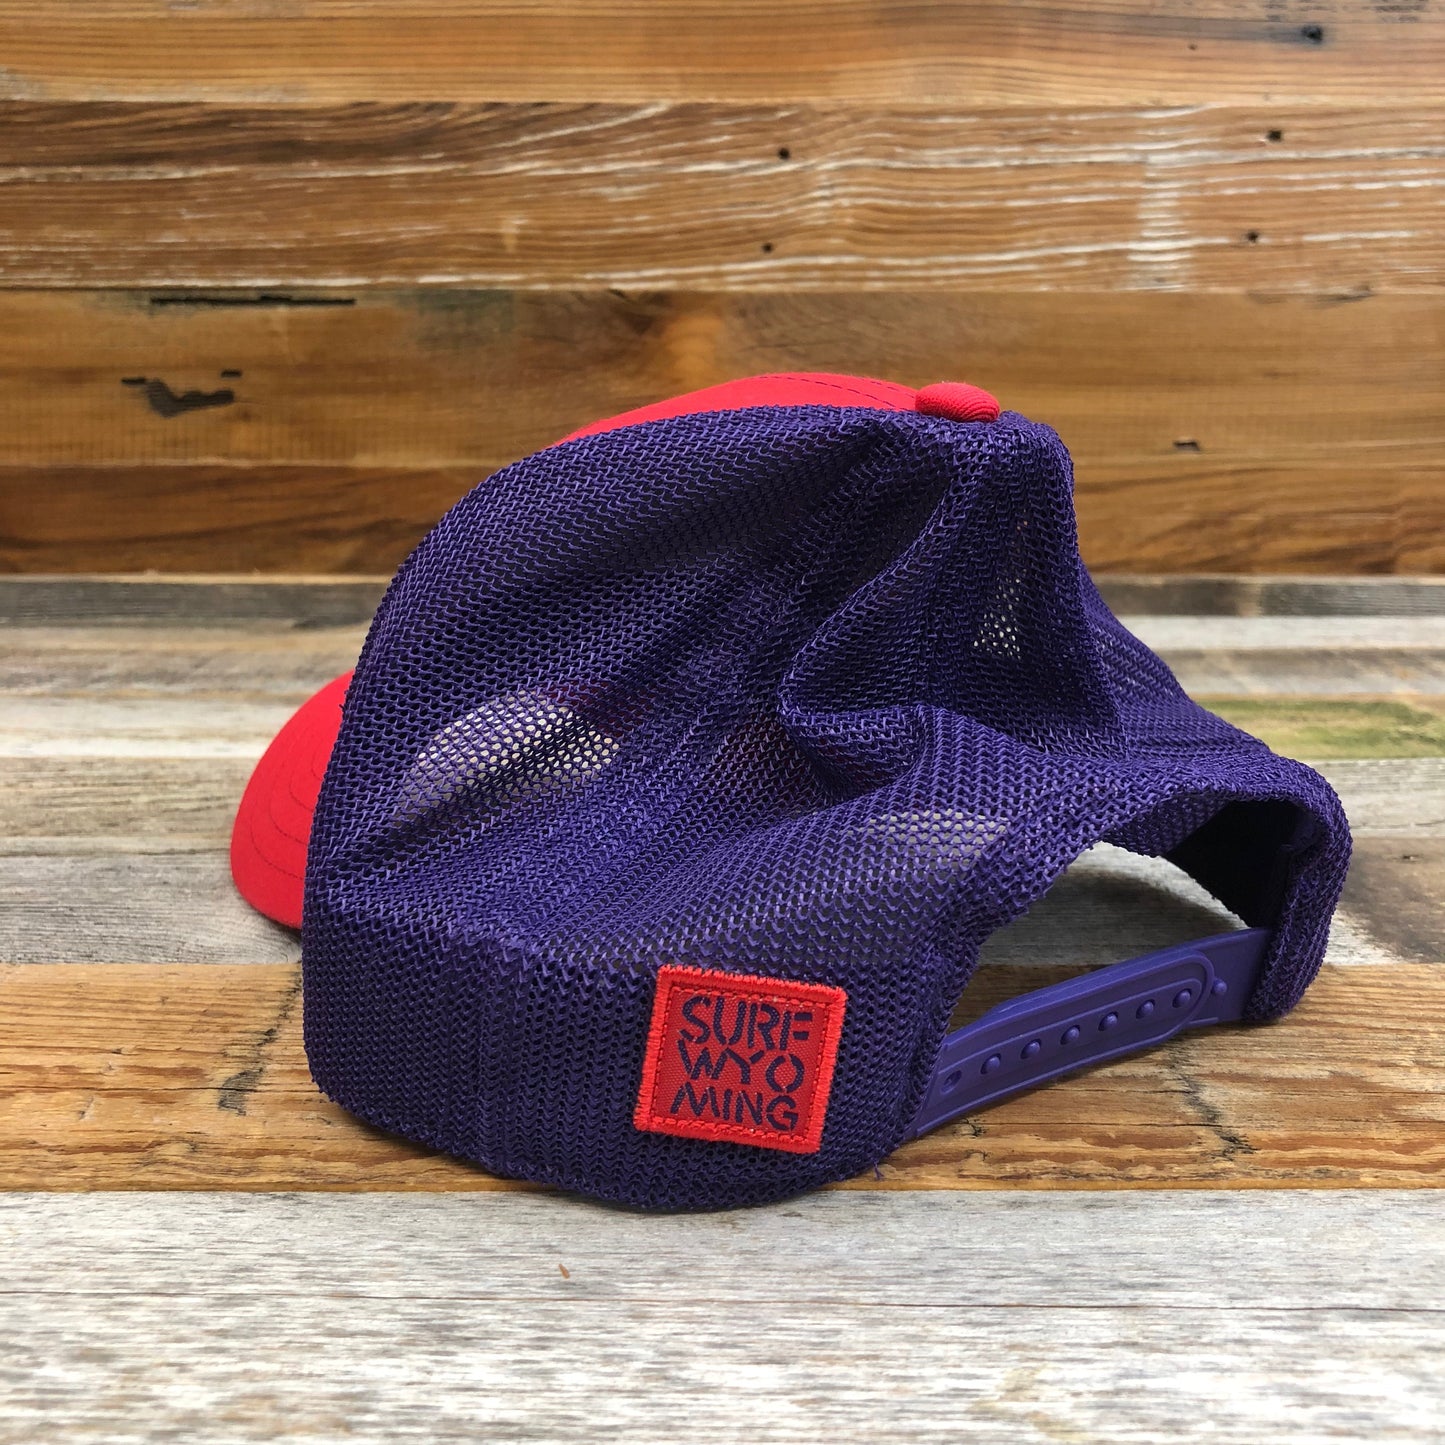 Surf Wyoming® Censored Bison Tech Mesh Hat - Red/Purple